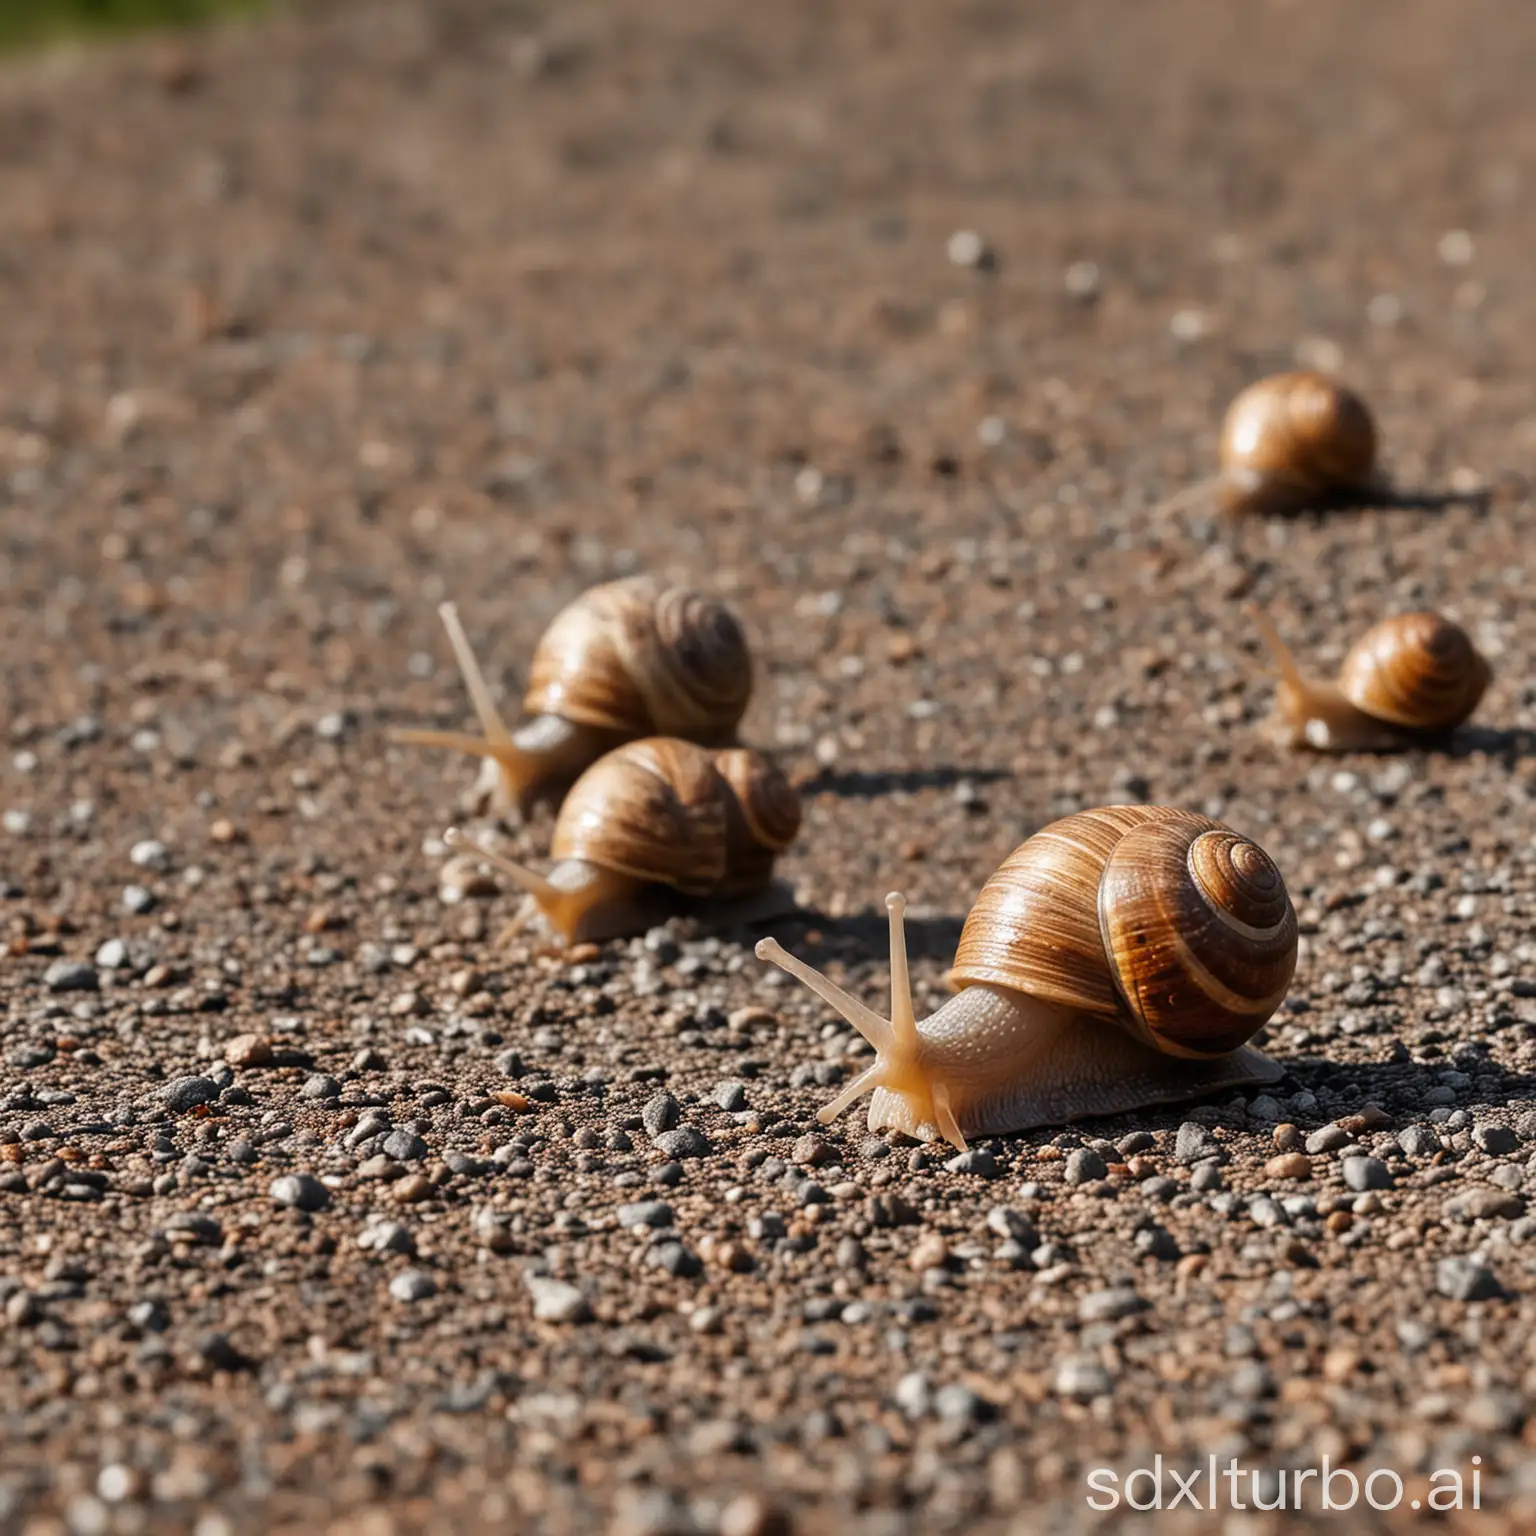 Snail army chasing ,shot from the front